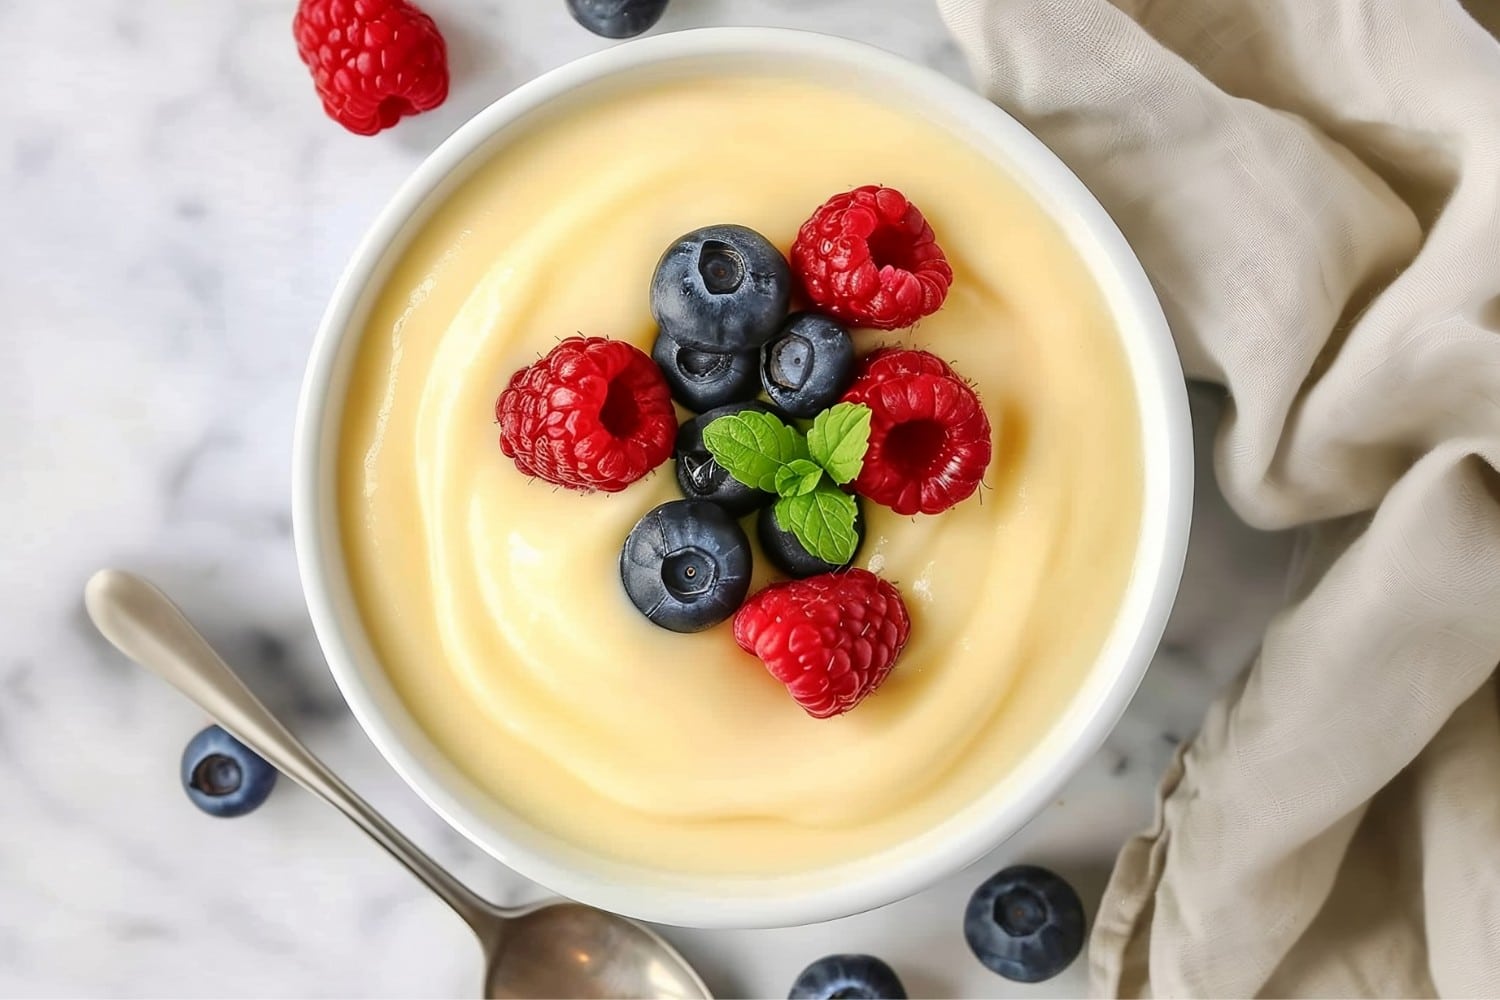 Silky smooth vanilla custard in a glass bowl, topped with raspberries and blueberries